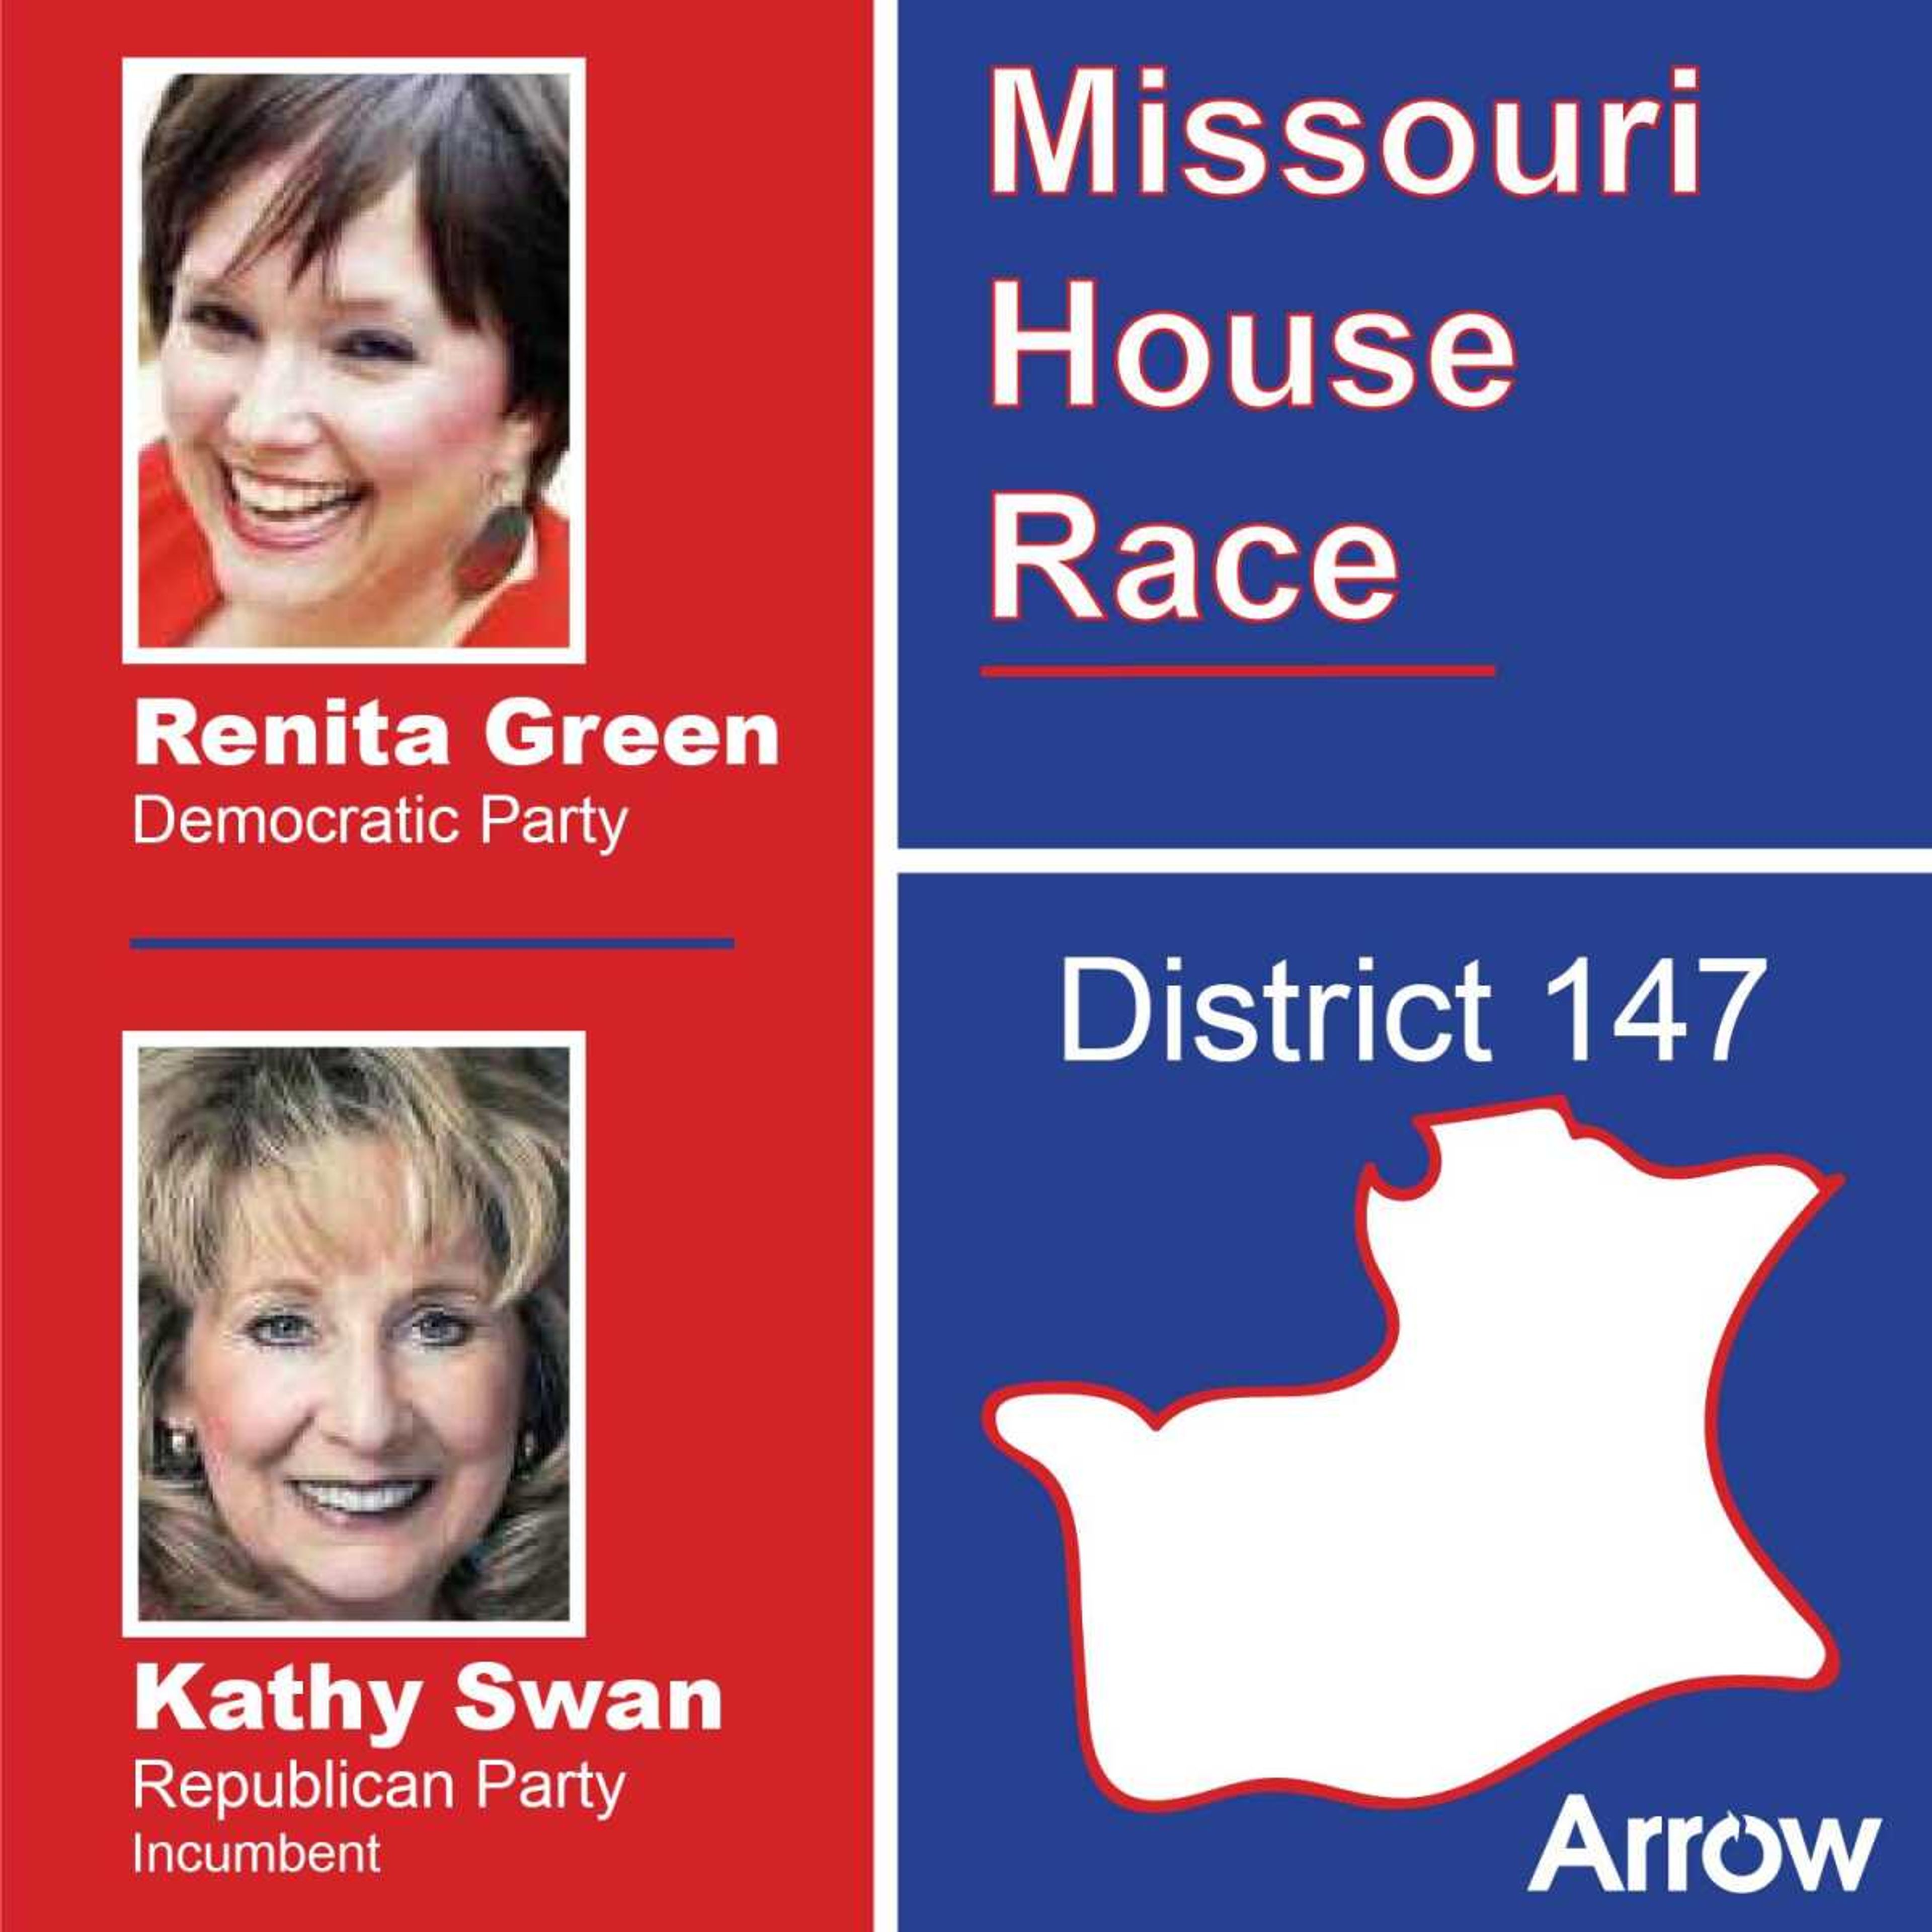 Missouri House of Representative District 147 up for grabs